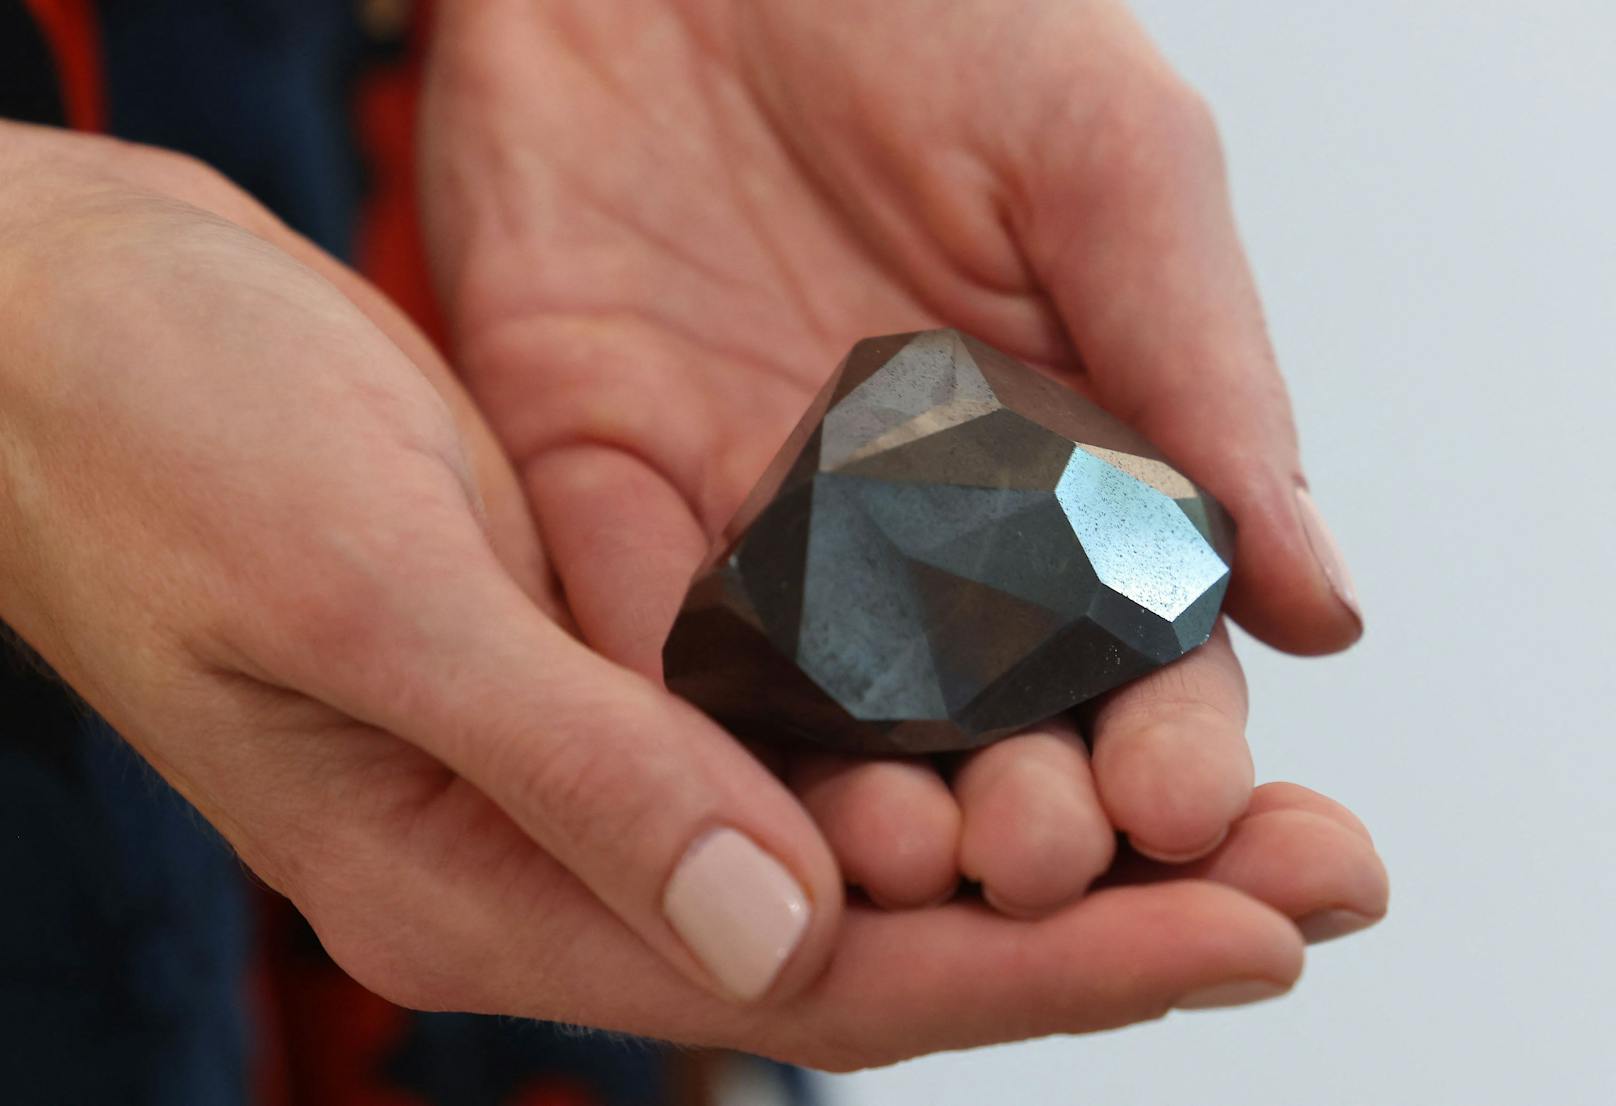 "The Enigma", a 555.55 carat black diamond, at Sotheby's in the Gulf emirate of Dubai.&nbsp;